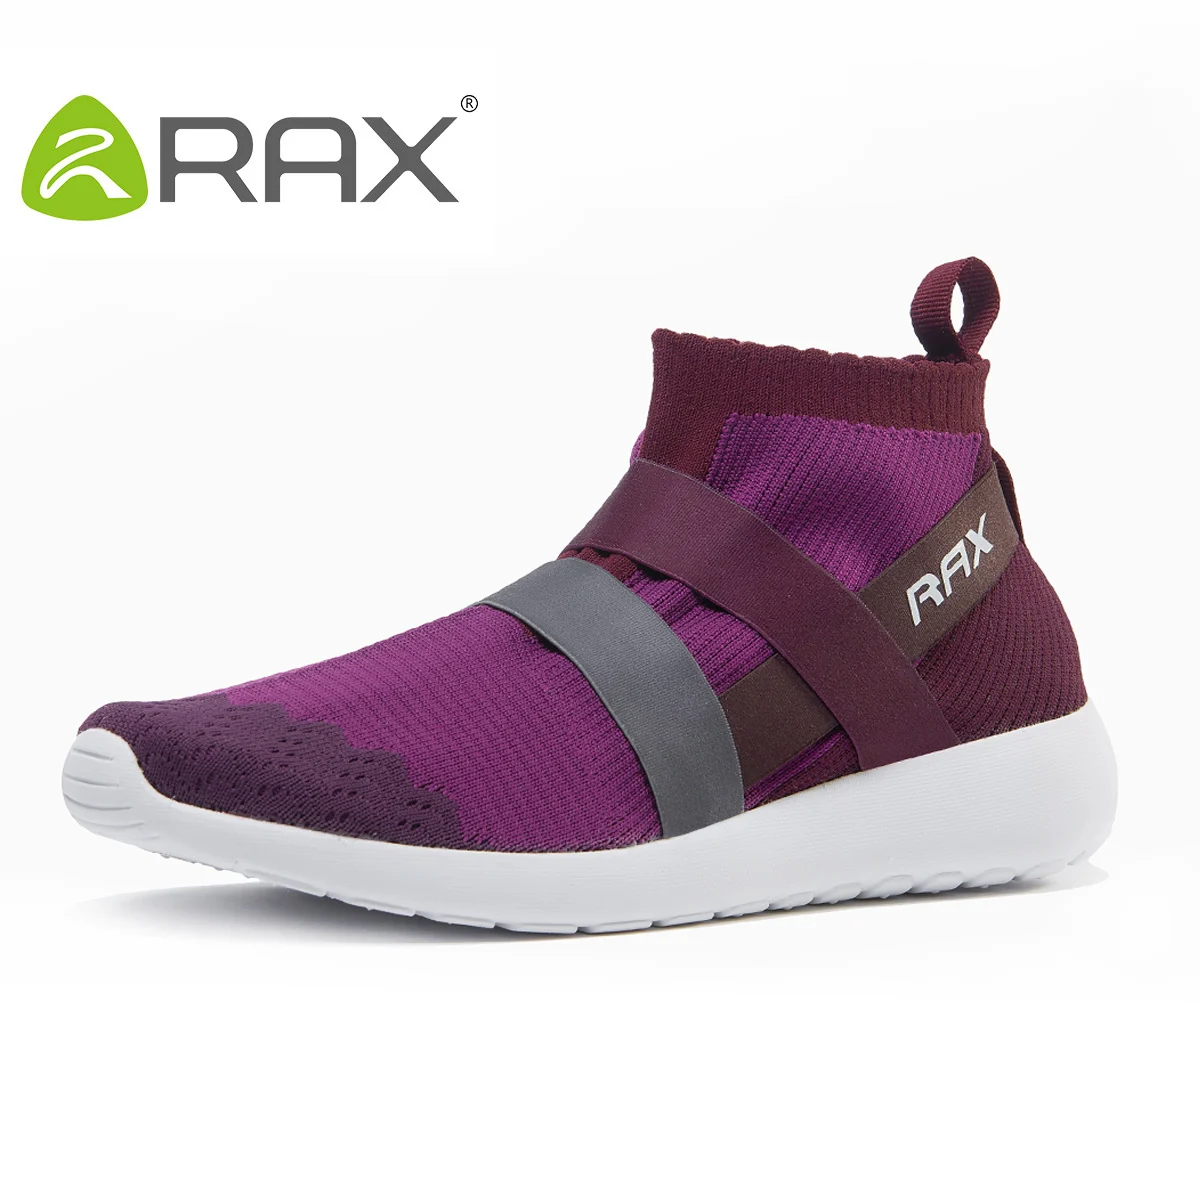 Rax Running Shoes For Women Lighweight Mesh Running Boots Female Breathable Sports Zapatillas Mujer B2818W